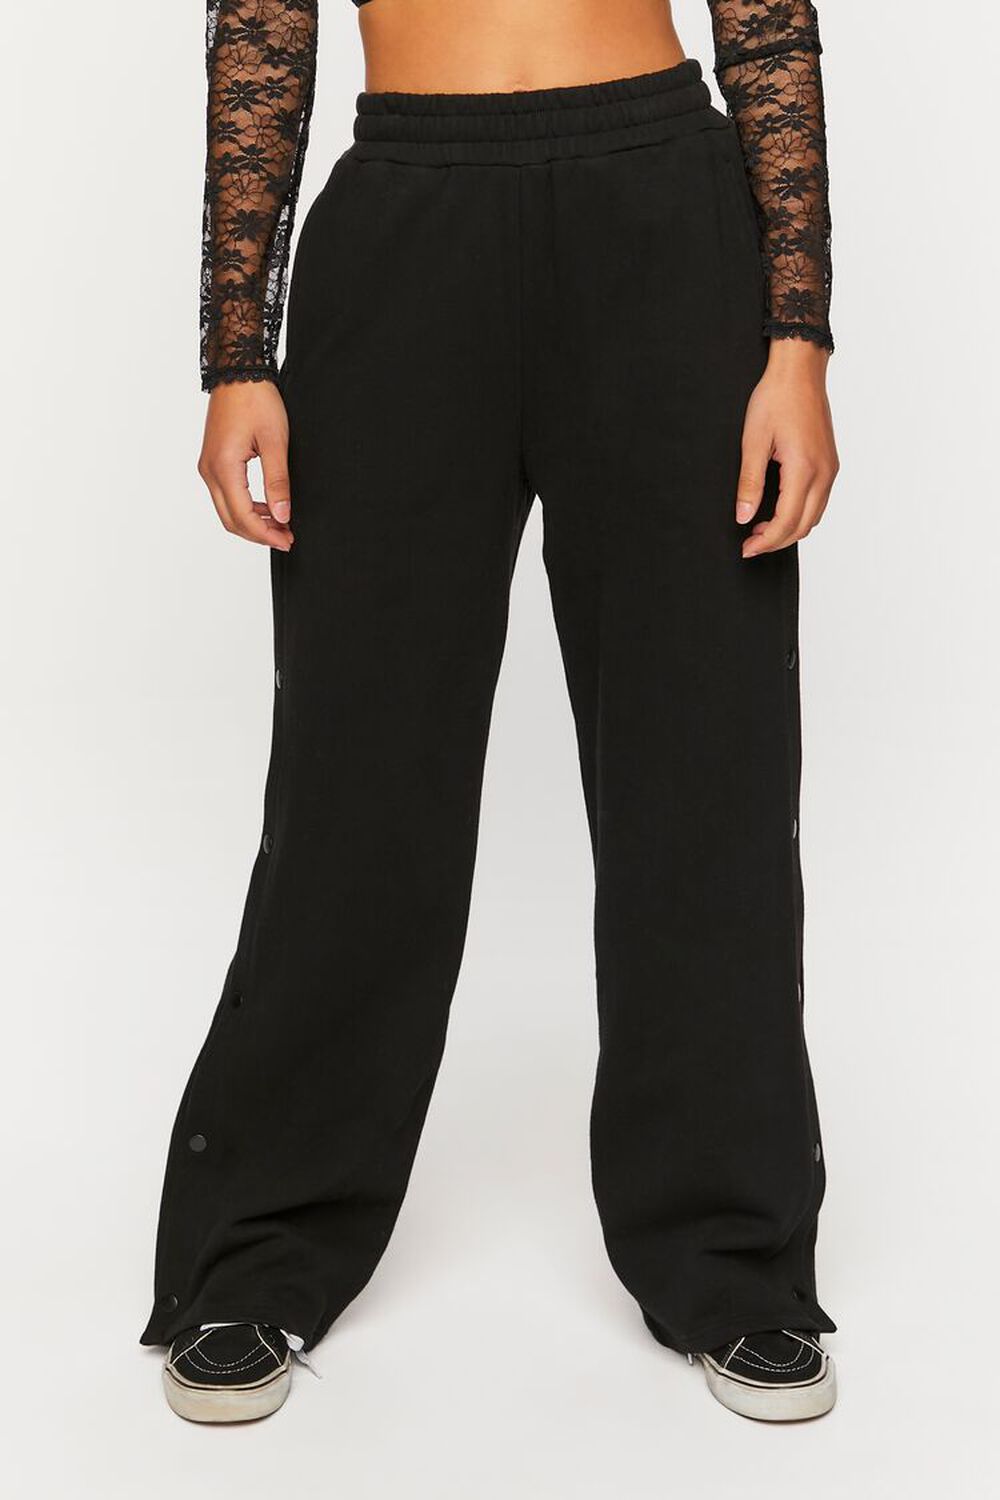 BLACK French Terry Tearaway Pants, image 2